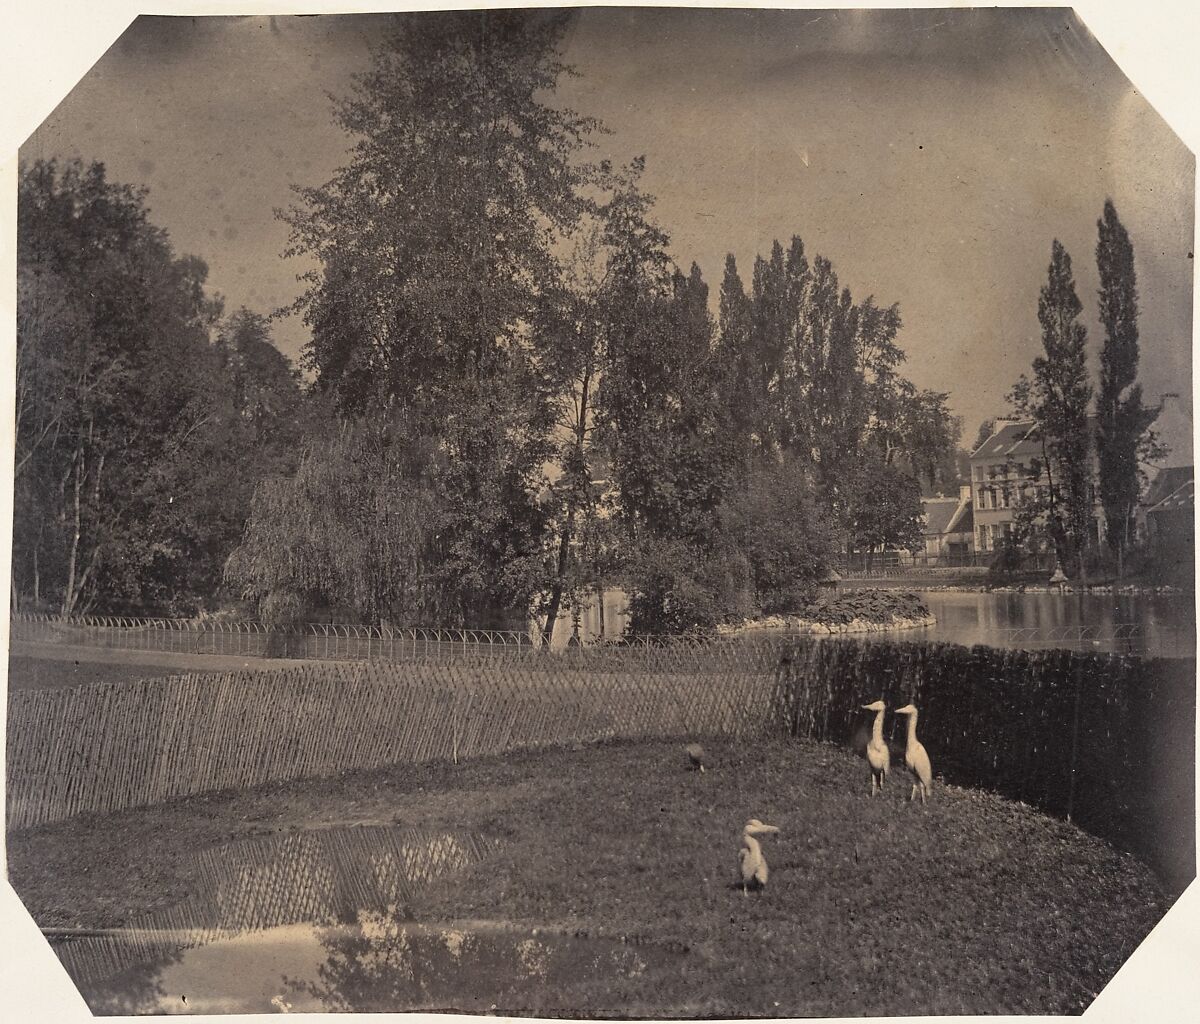 [Heron Pond, Zoological Gardens, Brussels], Louis-Pierre-Théophile Dubois de Nehaut (French, active Belgium, 1799–1872), Salted paper print from paper negative 